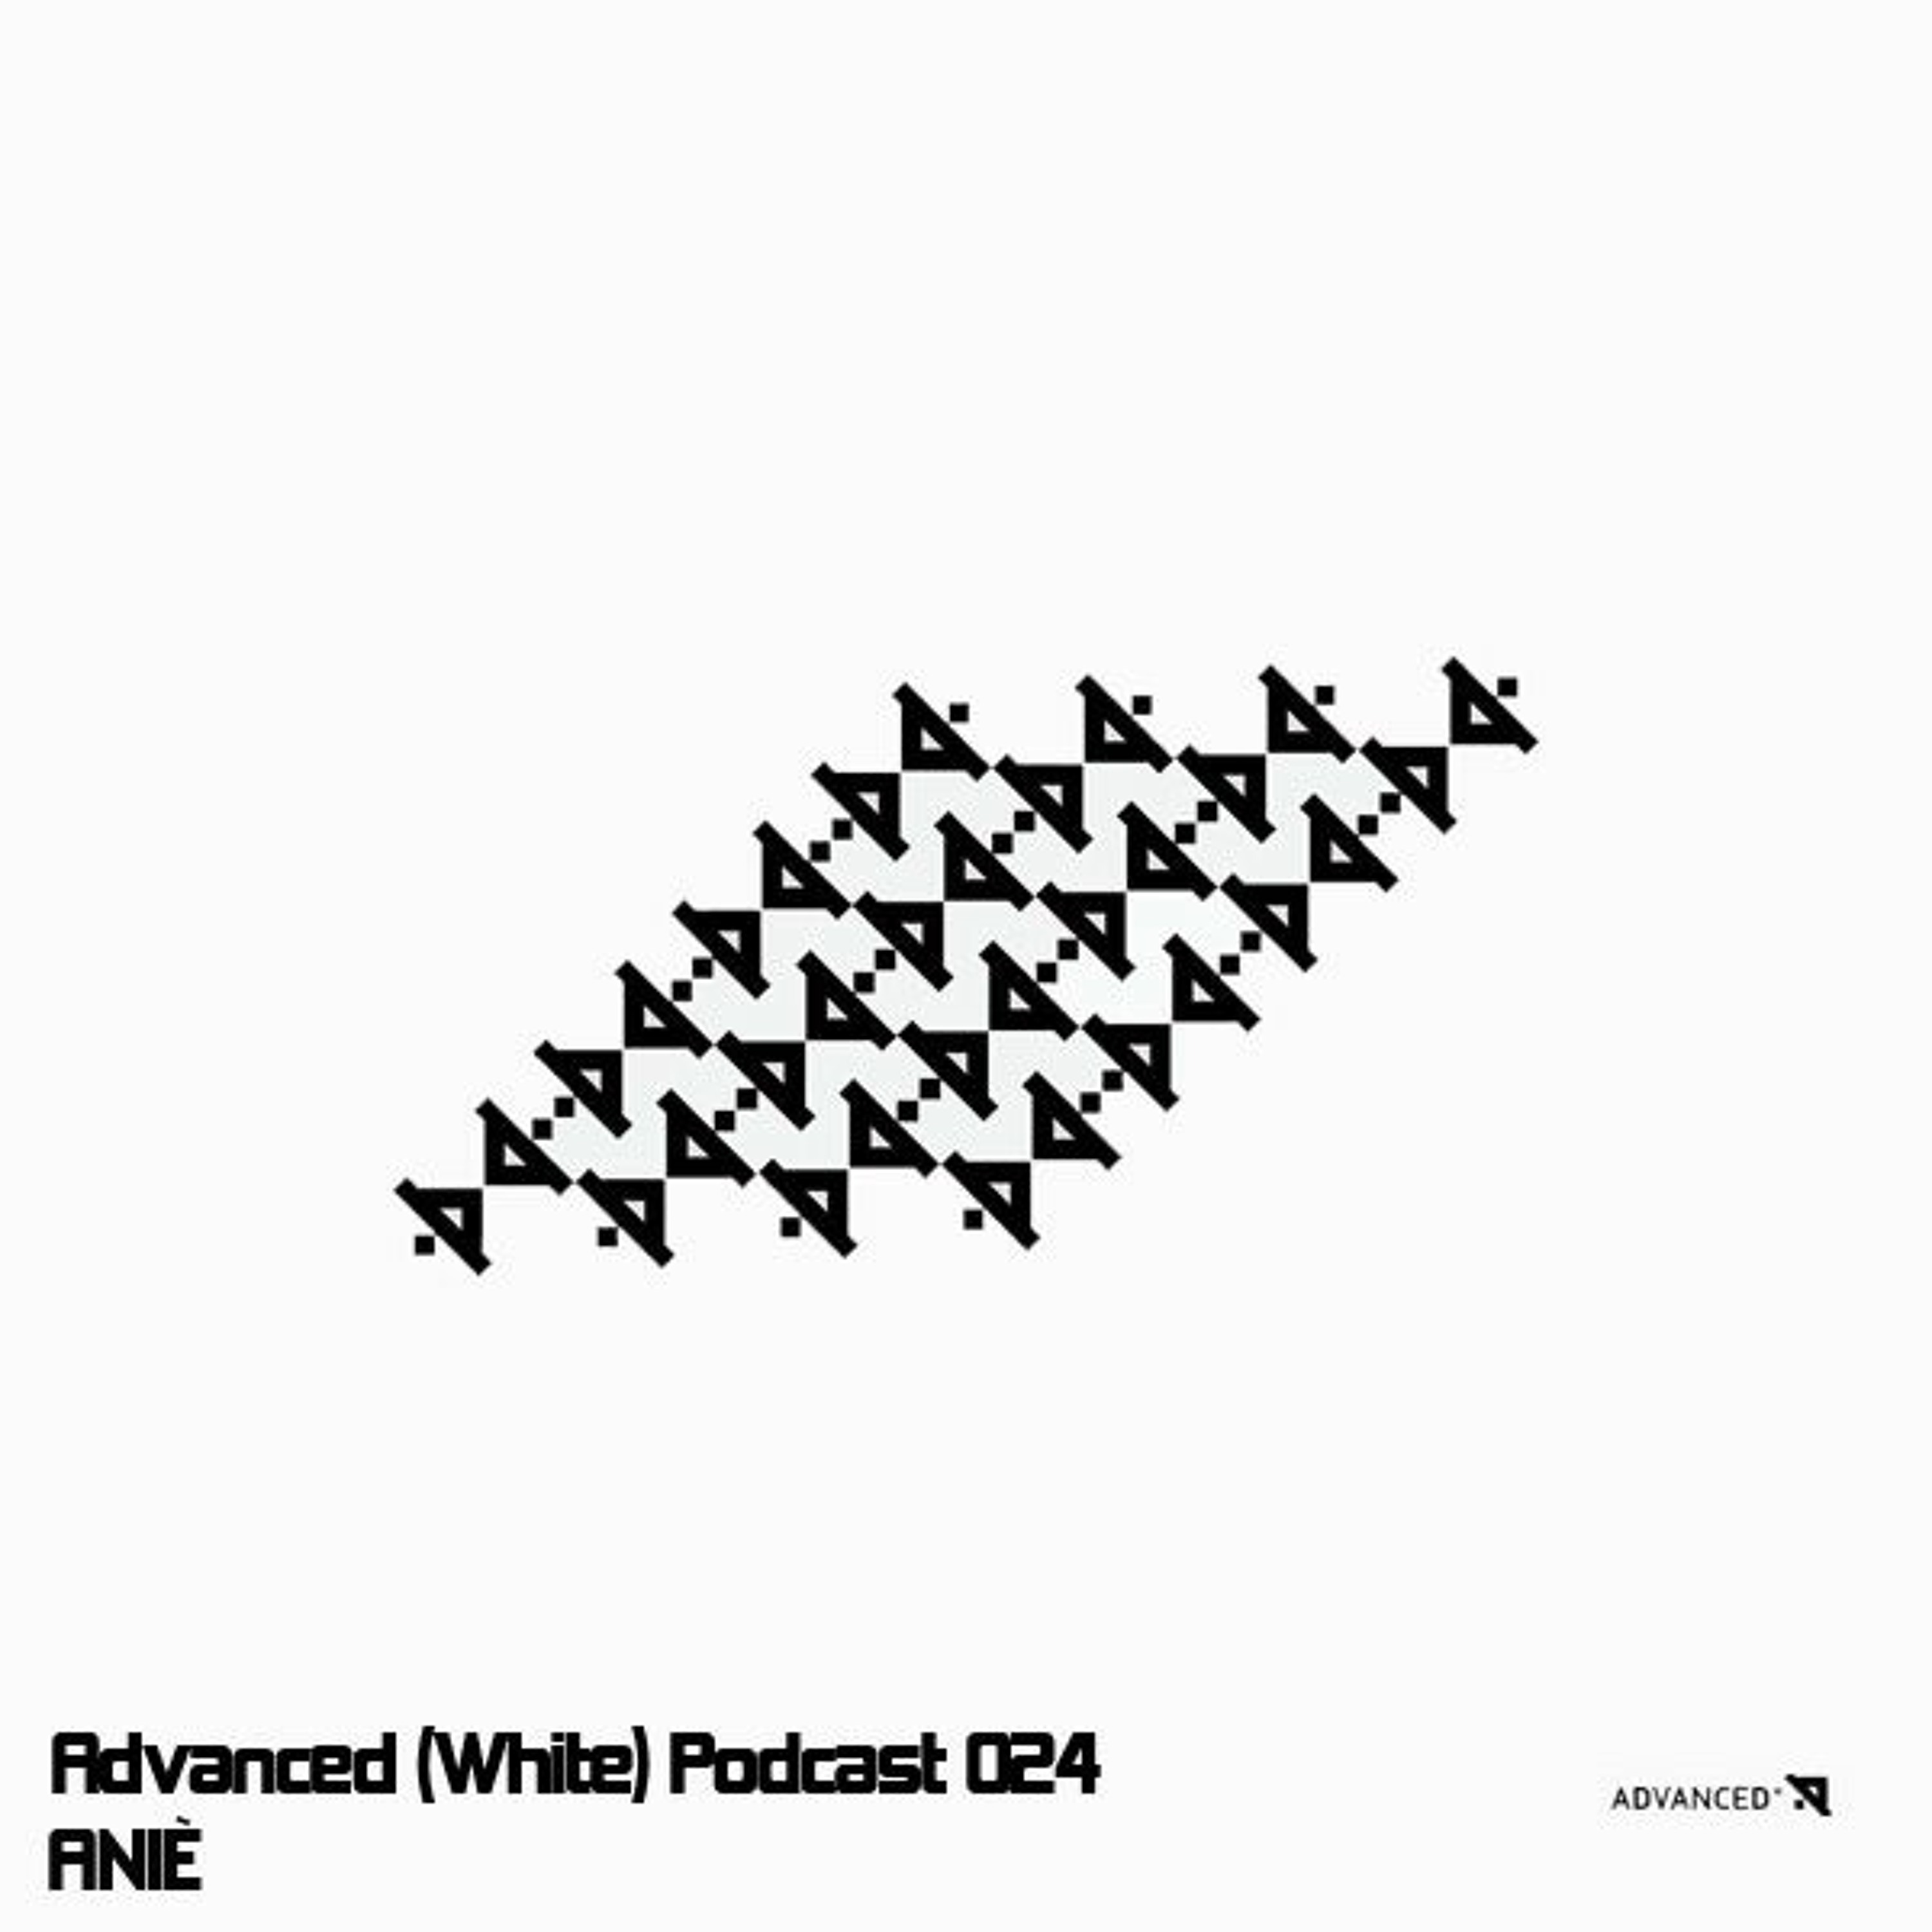 Advanced (White) Podcast 024 with ANIÈ